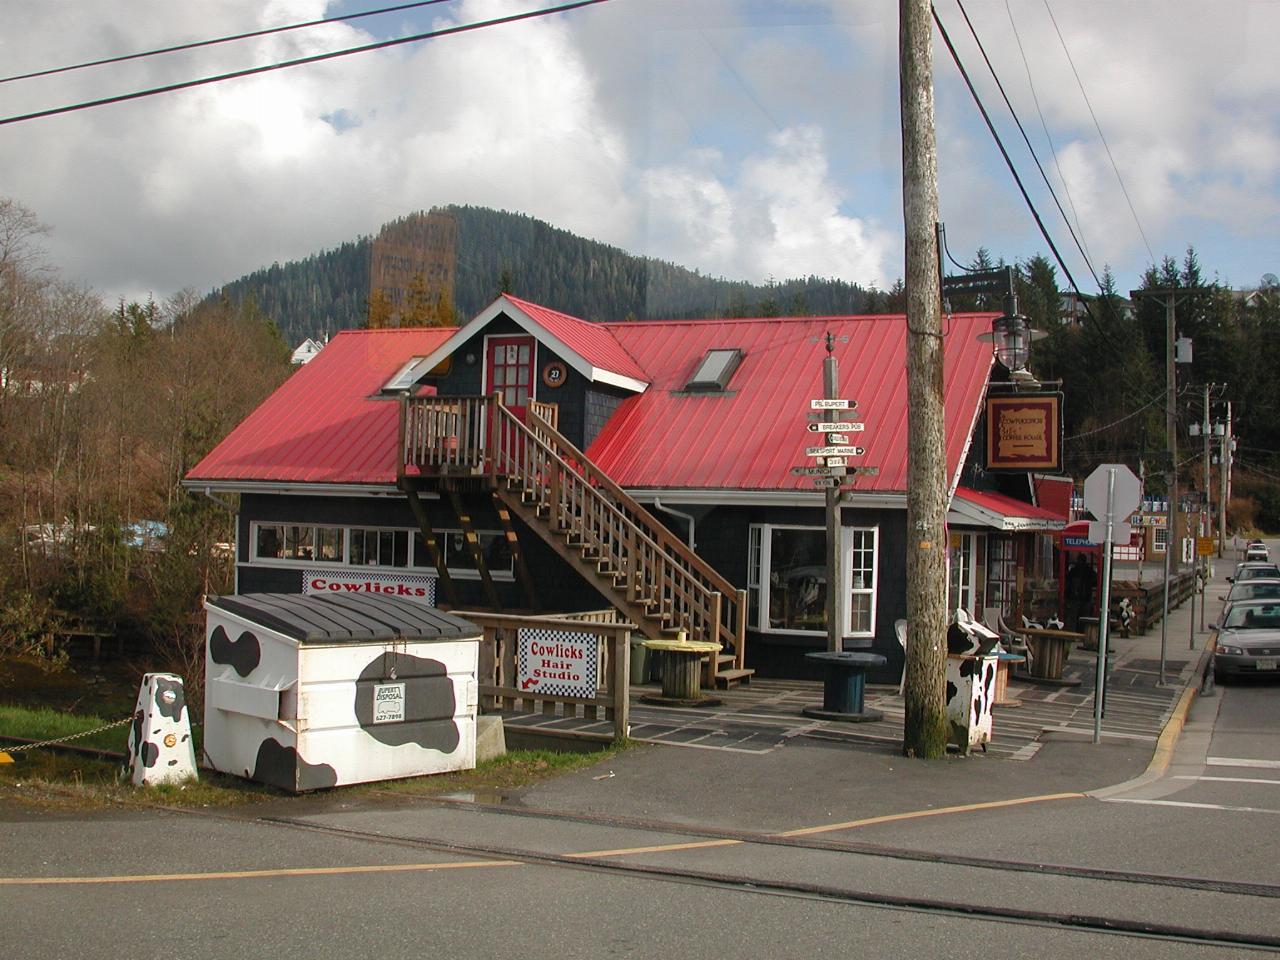 Coffee shop and street furniture with cow motif in Cow Bay, Prince Rupert